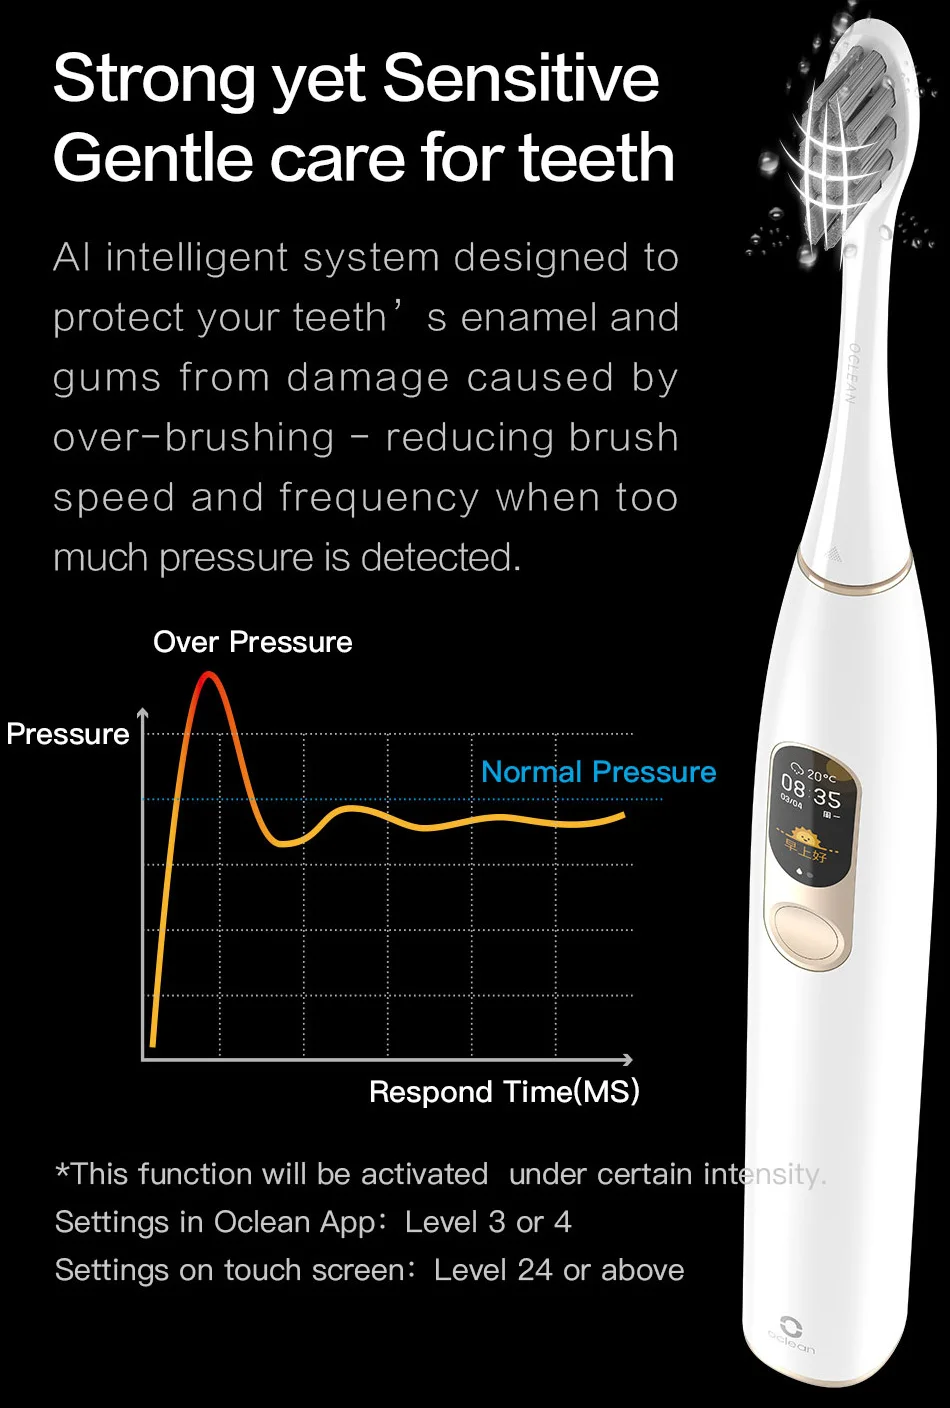 Oclean X Xiaomi Sonic Electric Toothbrush rechargeable Waterproof Ultrasonic Adult Tooth Brush Whitening Healthy Best Gift